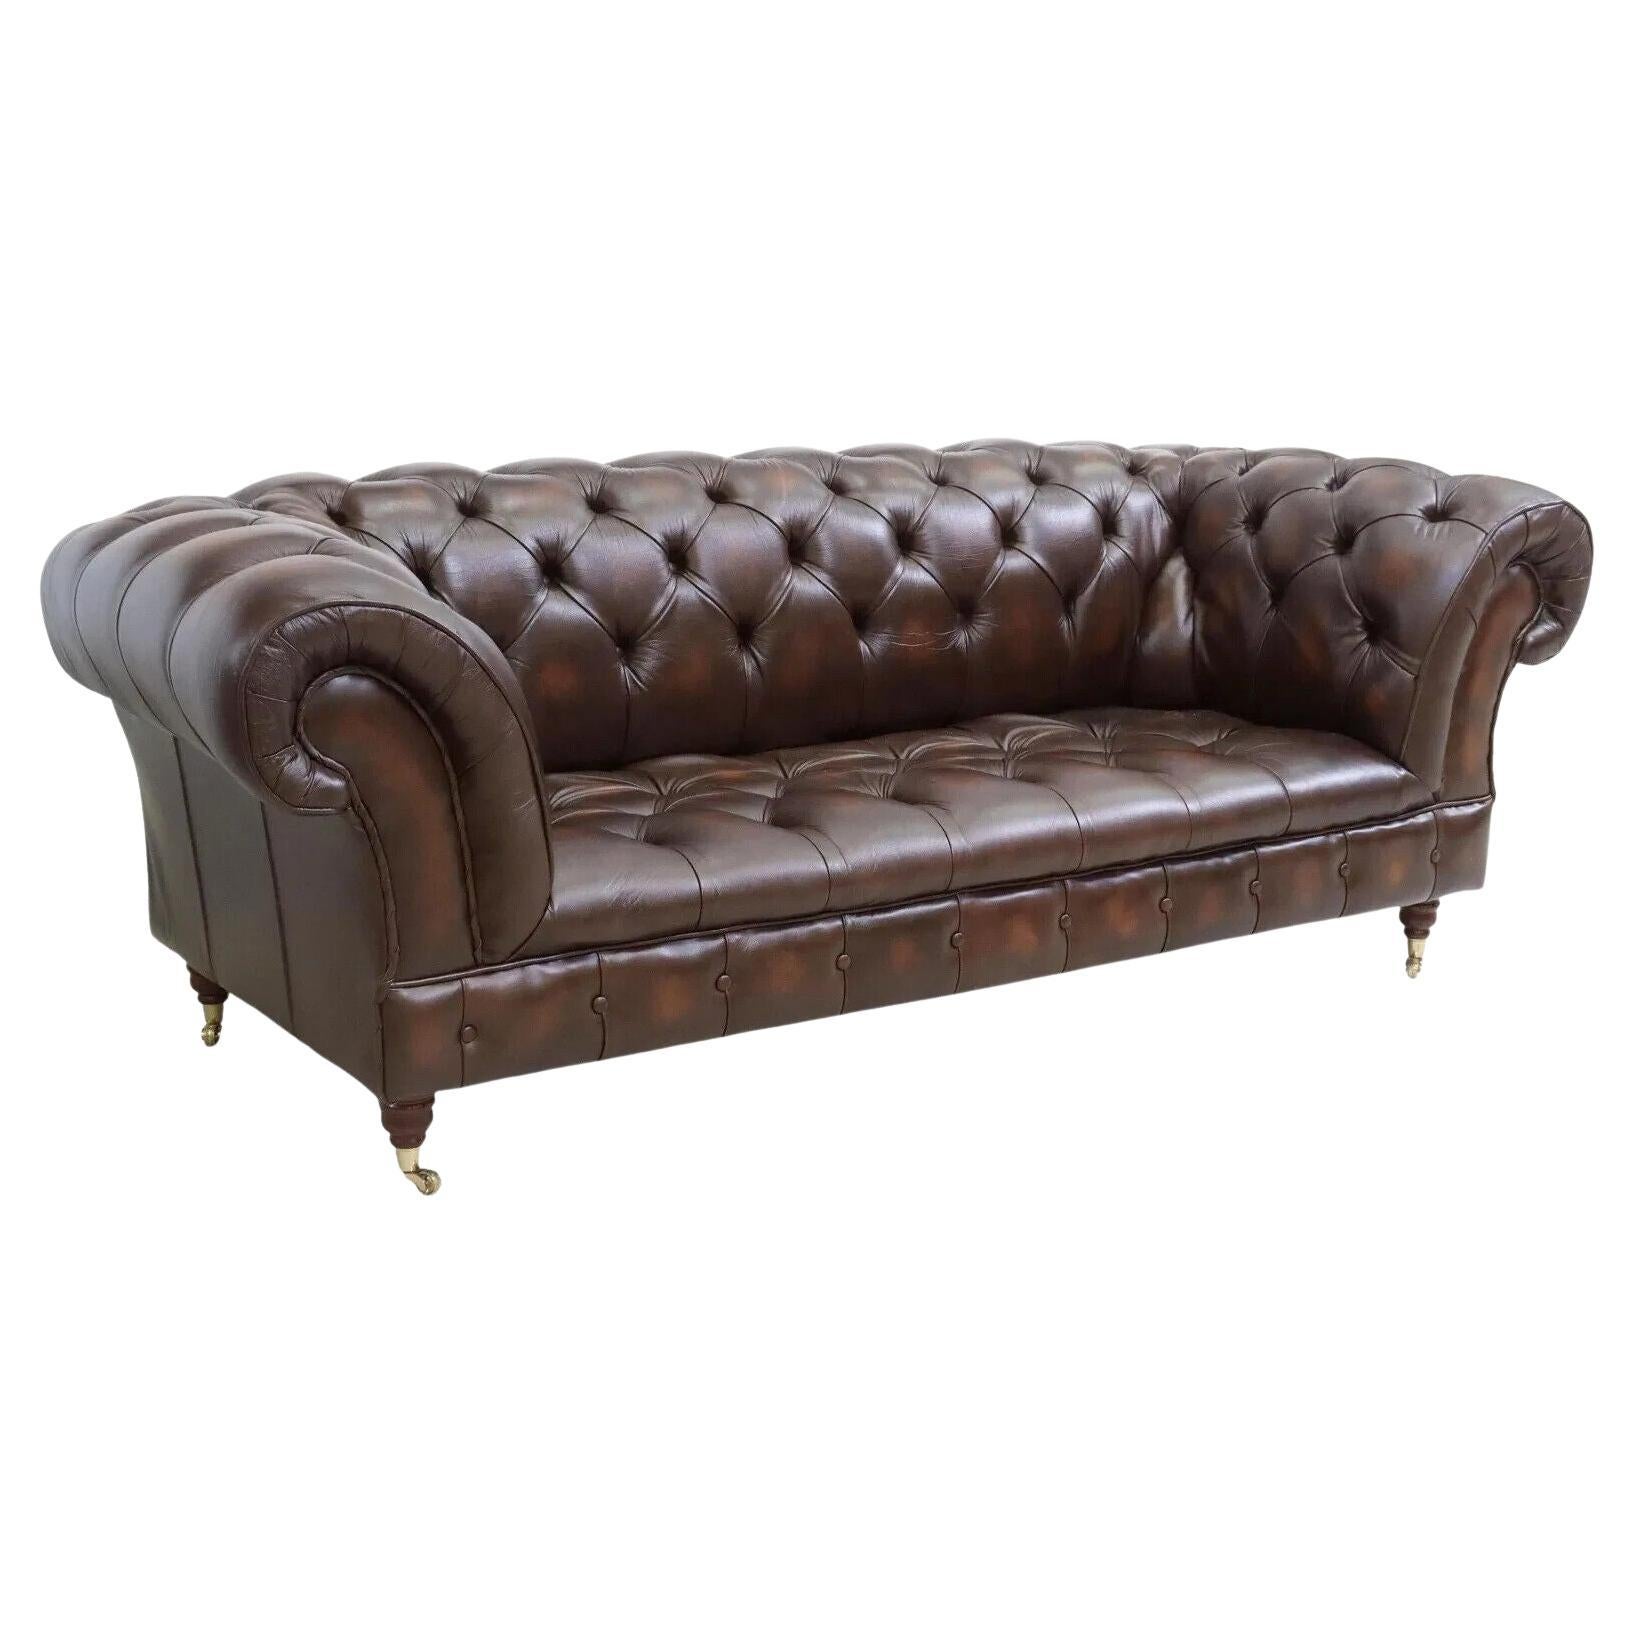 Sofa, Leather, Brown, English Chesterfield Style, Nailhead, Rolled Arms, Tufted